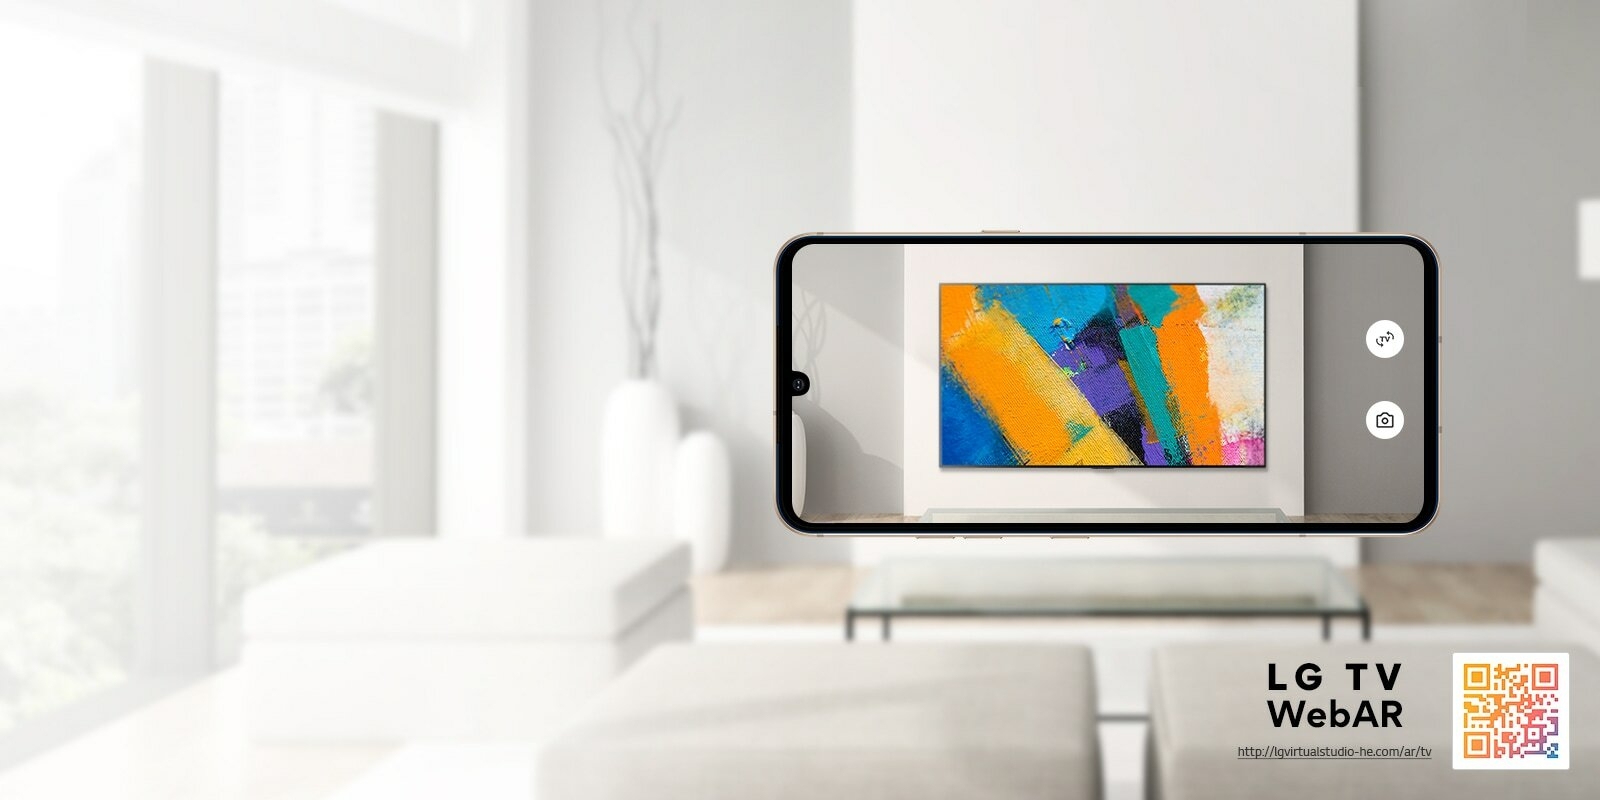 This is a web AR simulation image of a LG OLED TV.  A faded-in mobile phone that is currently taking a photo is displayed in a minimalist room.  There is a QR code at the bottom right.